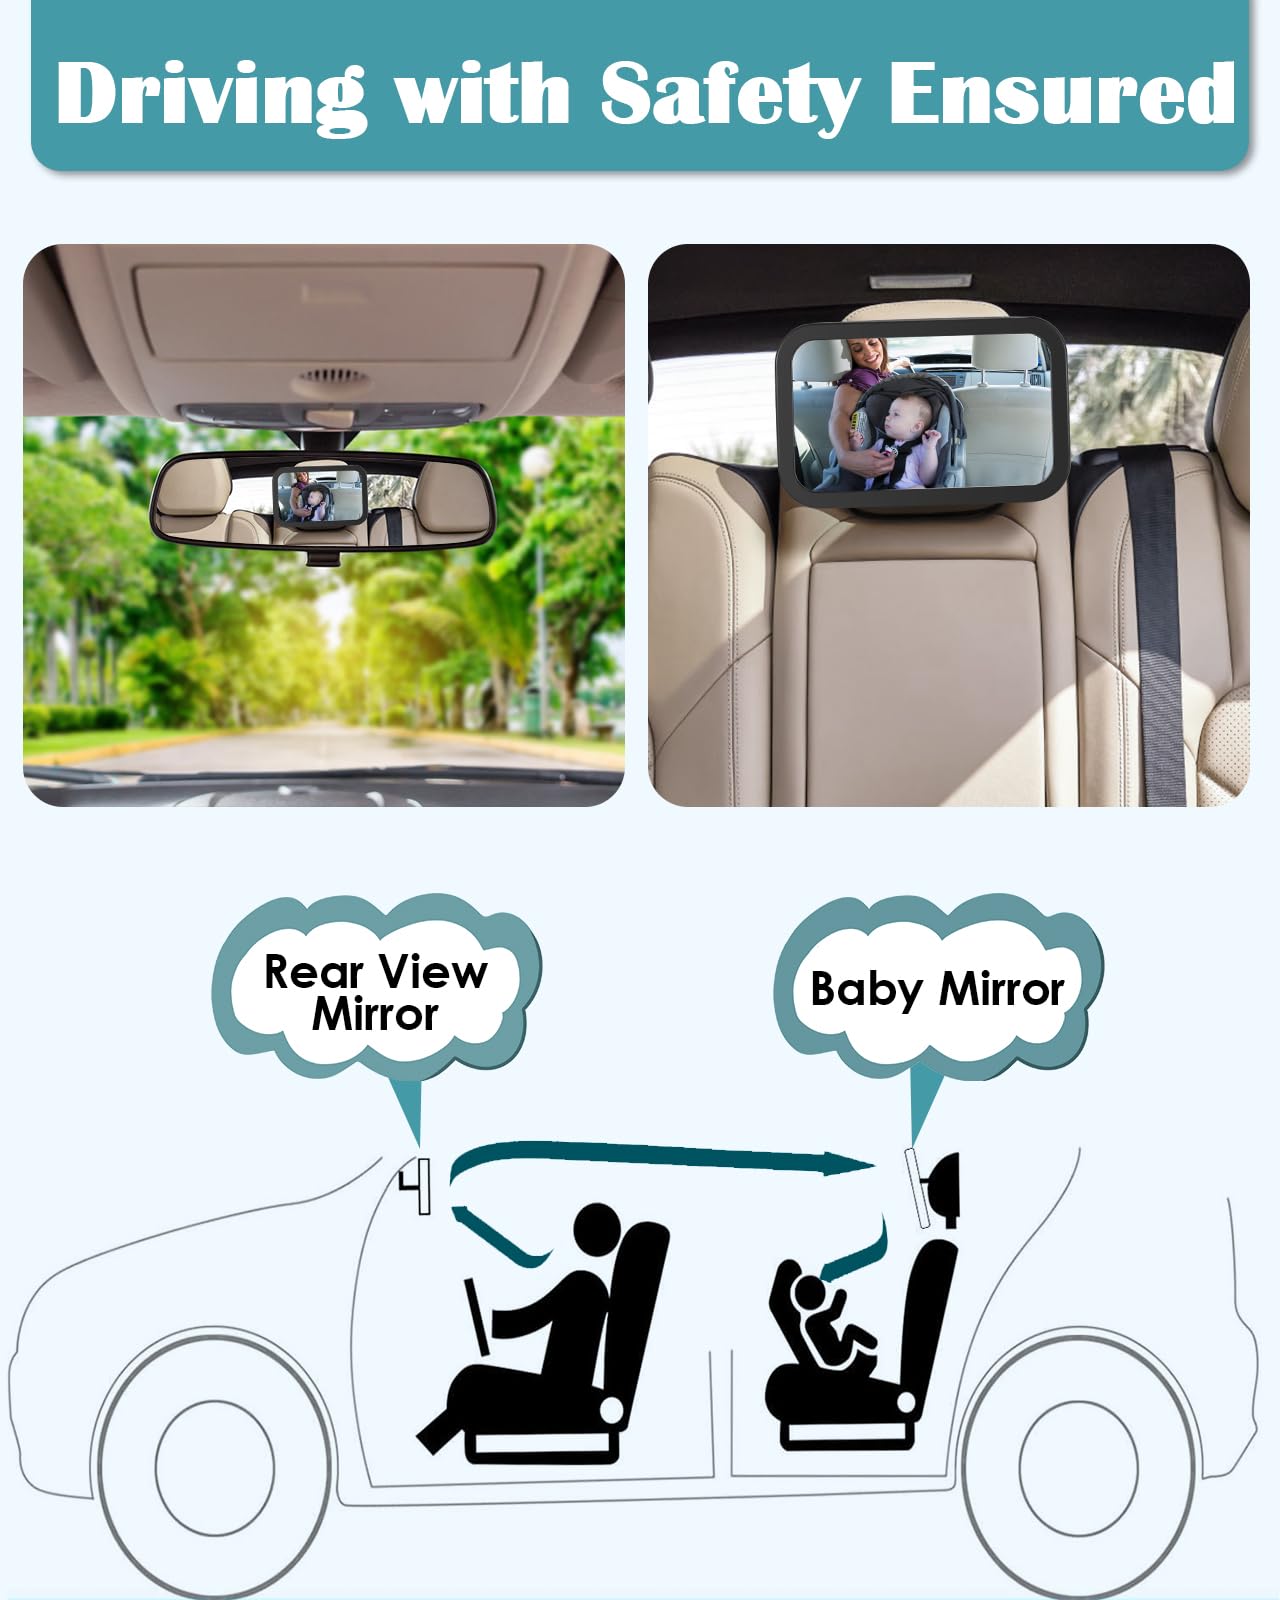 Zacro Baby Car Mirror, Shatter-Proof Acrylic Baby Mirror for Car, Rearview Baby Mirror-Easily to Observe The Baby's Every Move, Rear Facing Car Seat Mirror Safety and 360 Degree Adjustability